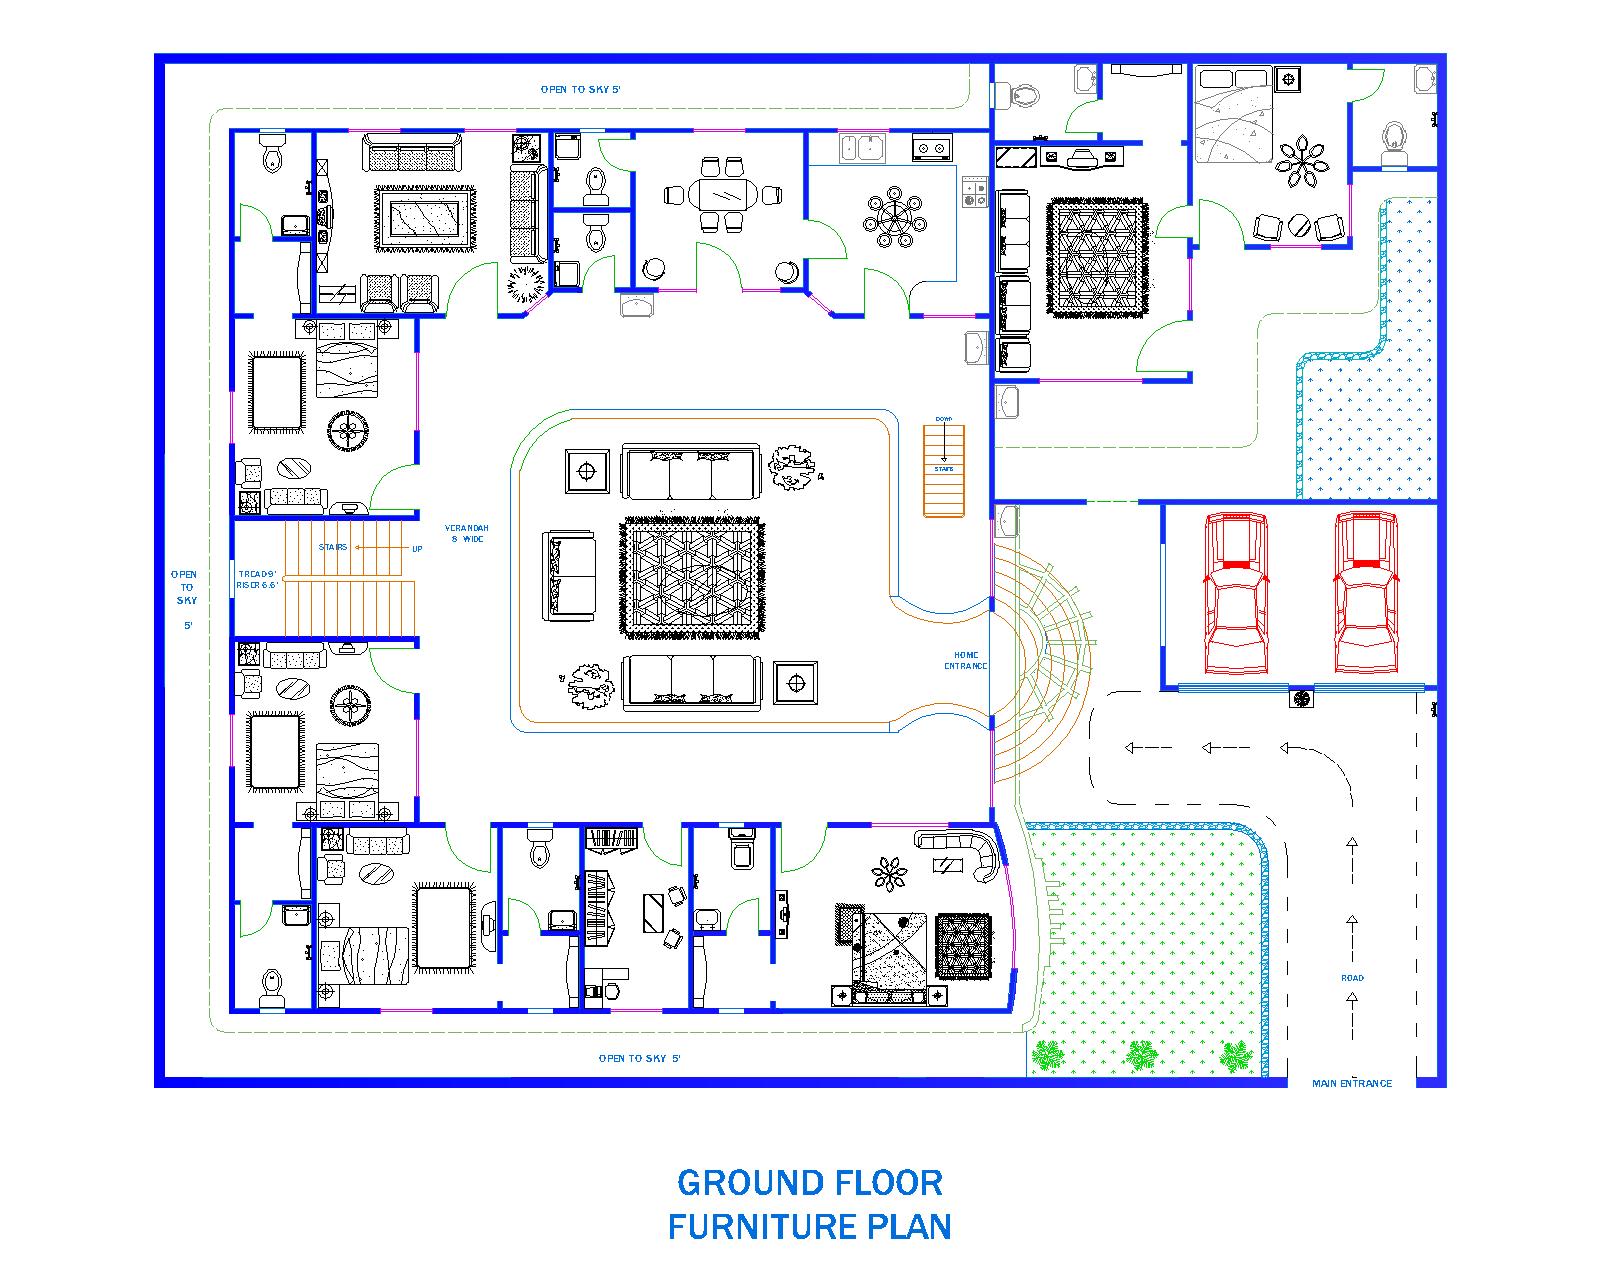 Design Architectural 2d Floor Plans In Autocad Very Fast By